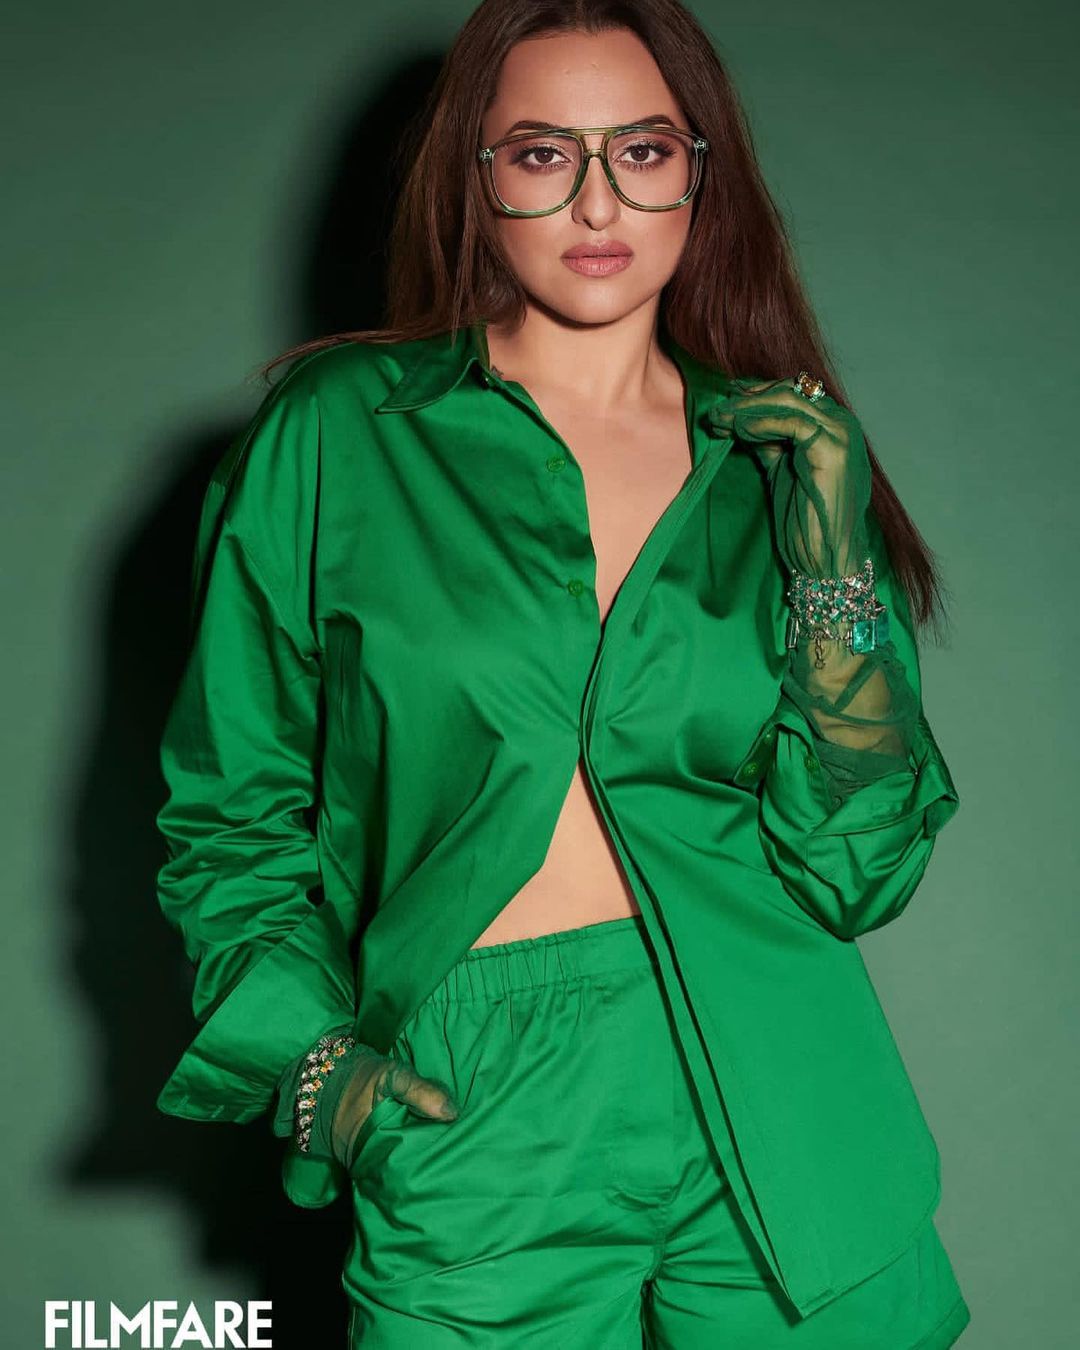 Sonakshi Sinha looks chic in the green pantsuit.